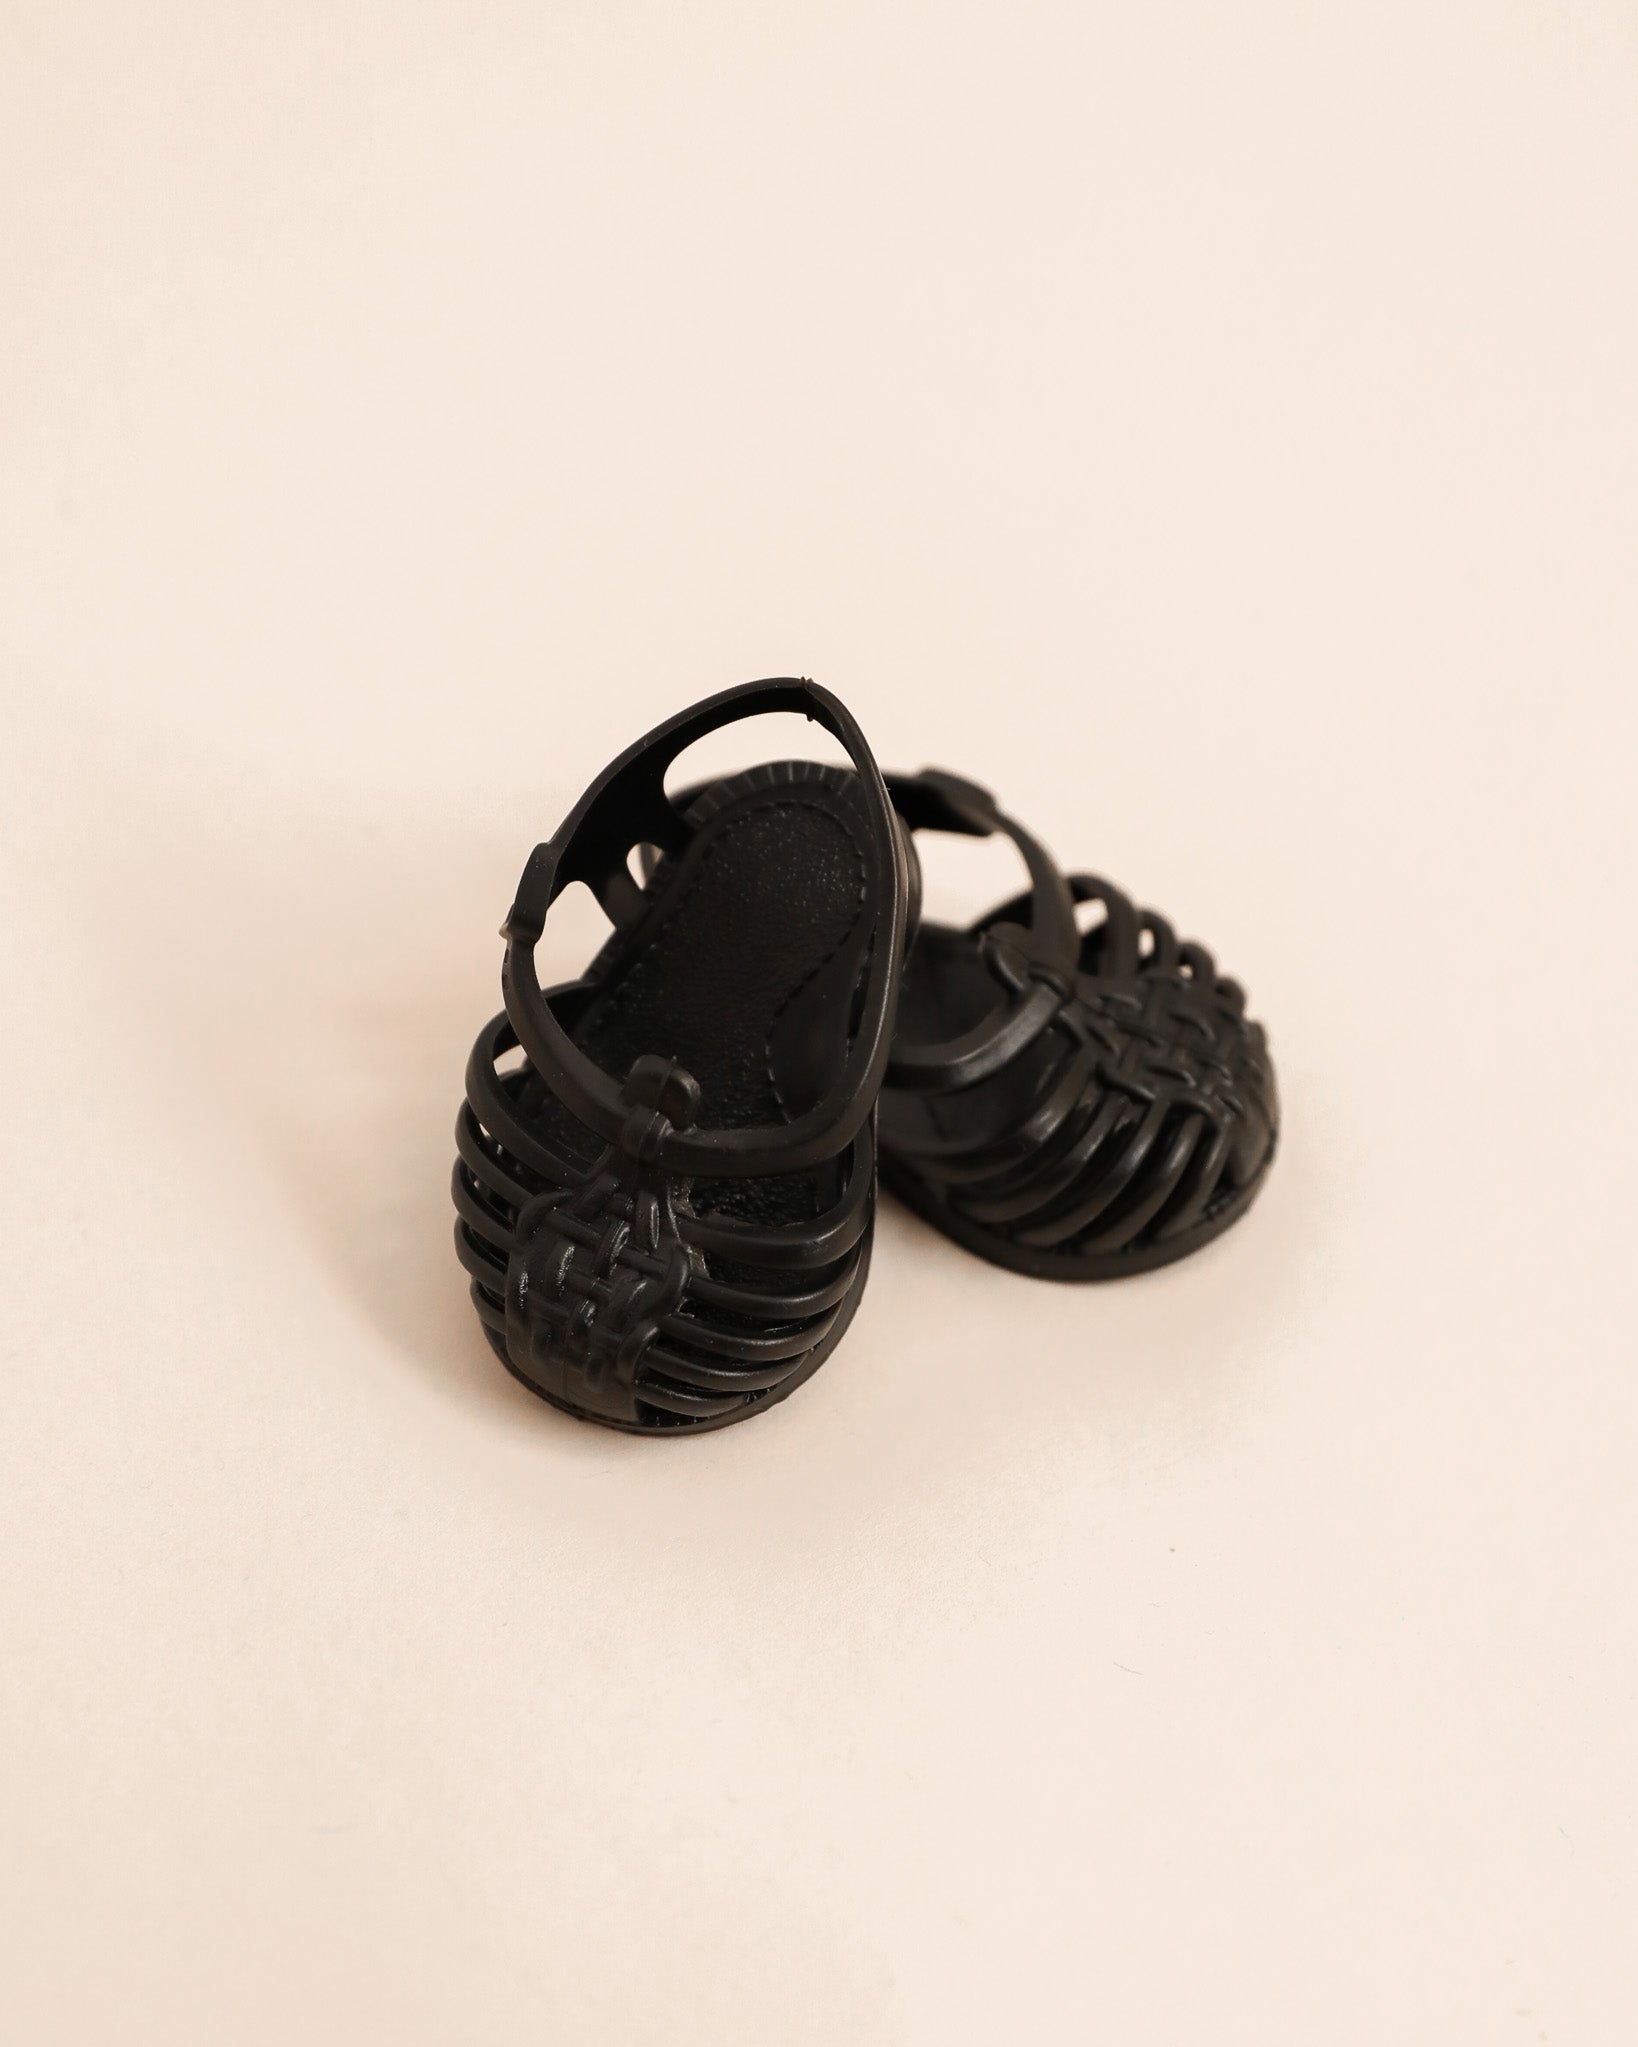 Doll clothes, Minikane doll clothes, Minikane, doll shoes, shoes for dolls